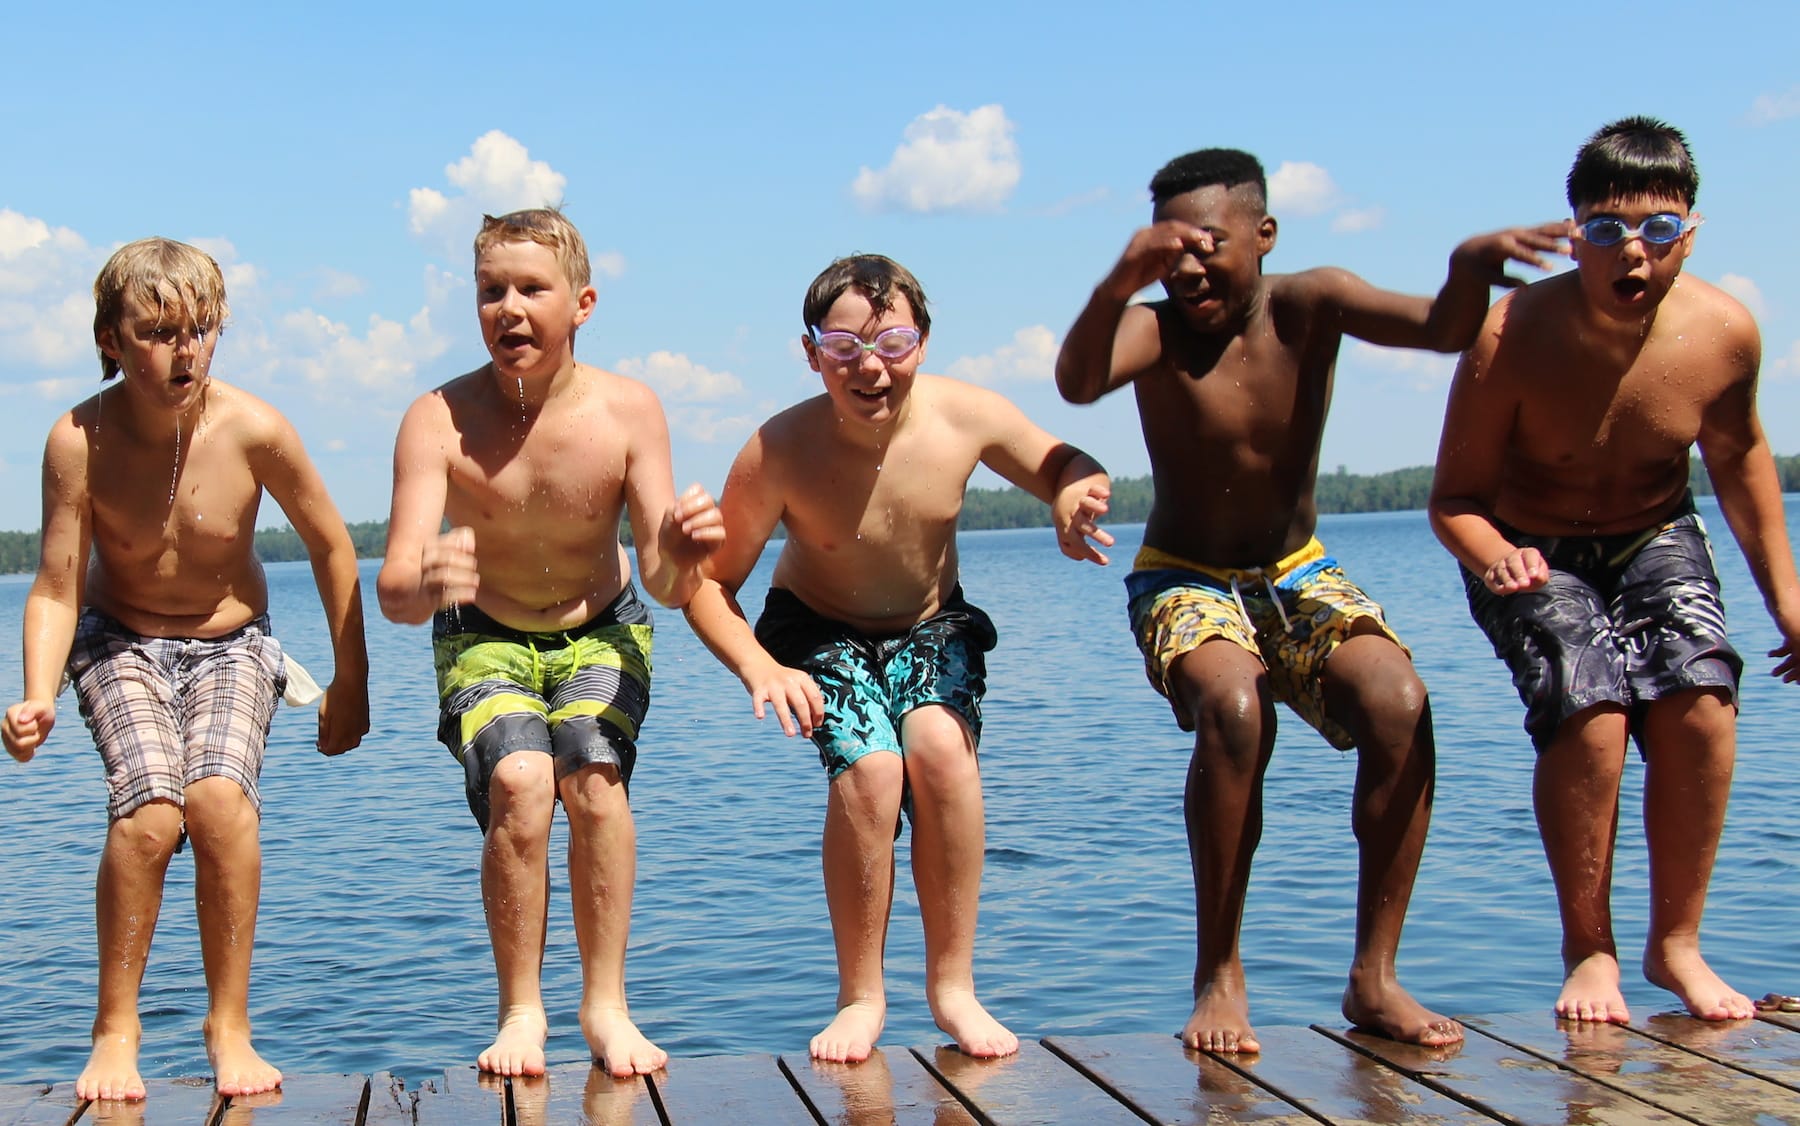 boys jumping off dock into water